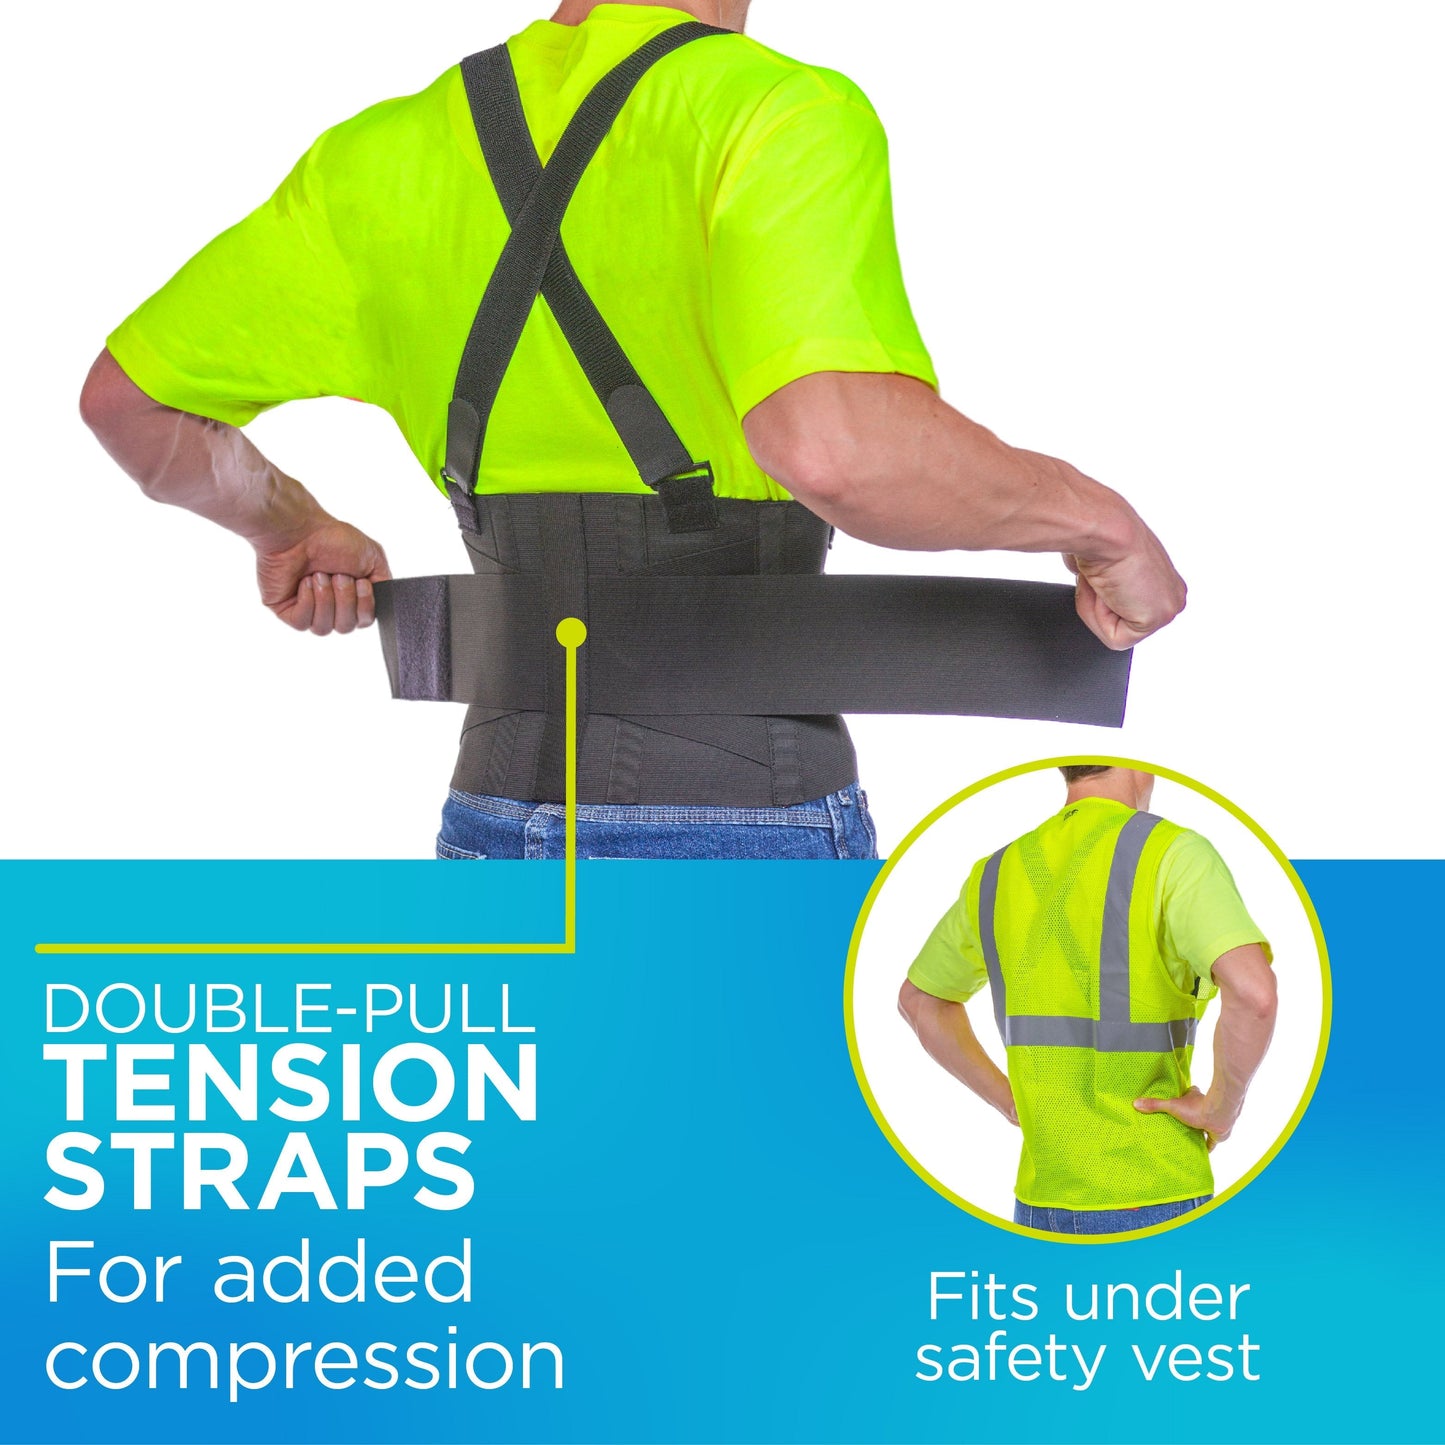 Work Back Brace for Heavy Lifting | Industrial Construction & Warehouse Support Belt With Shoulder Straps